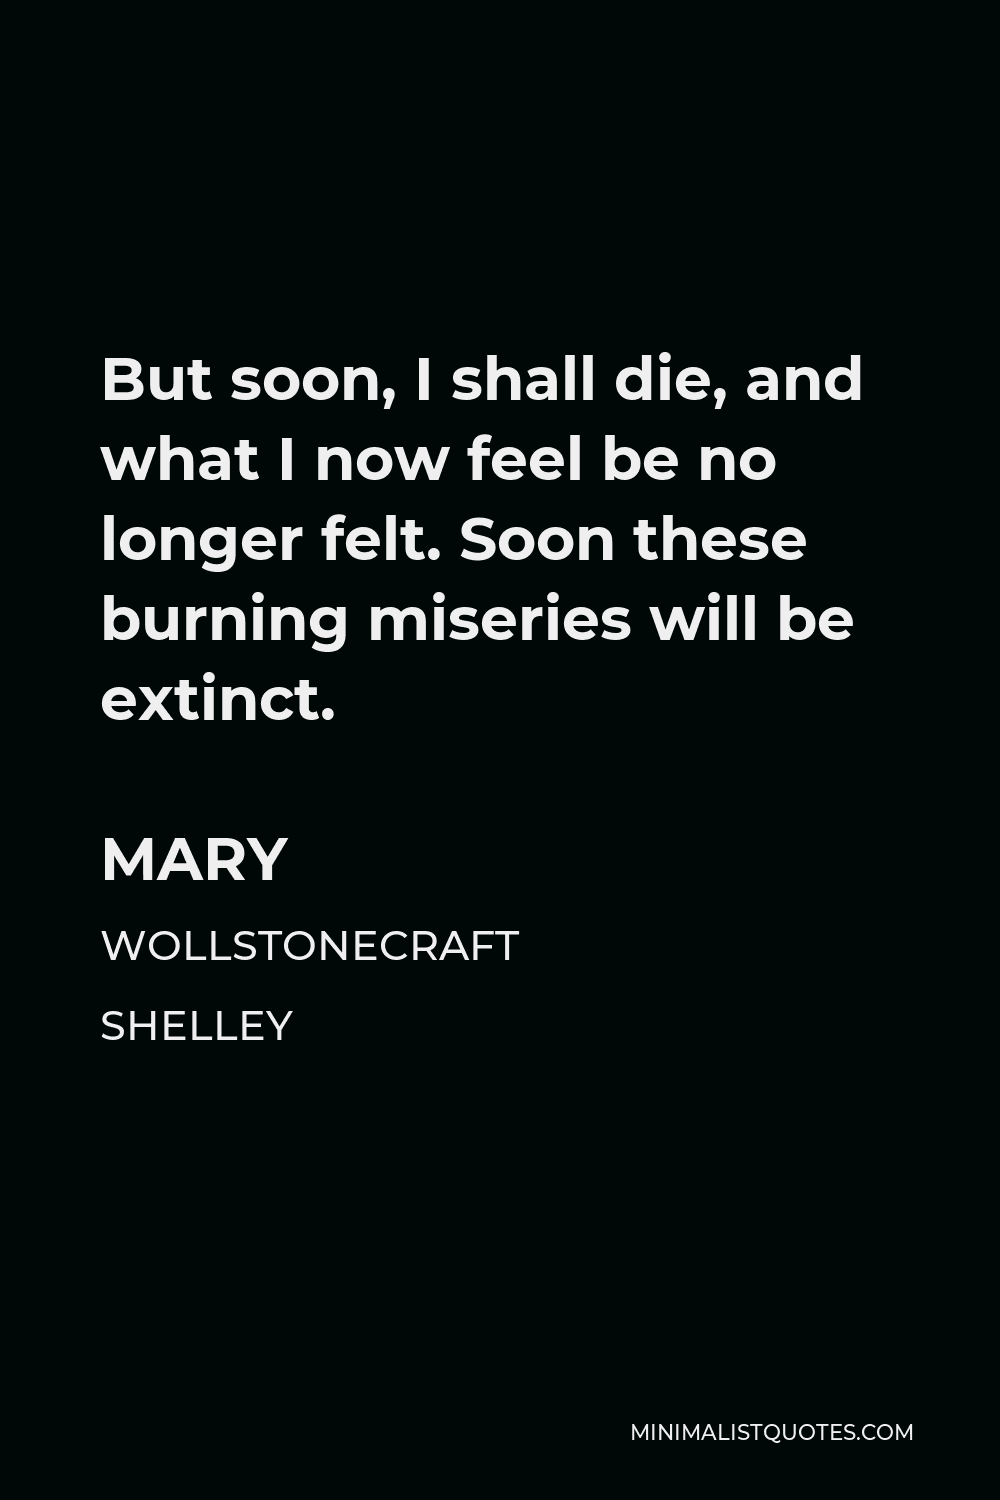 Mary Wollstonecraft Shelley Quote - But soon, I shall die, and what I now feel be no longer felt. Soon these burning miseries will be extinct.